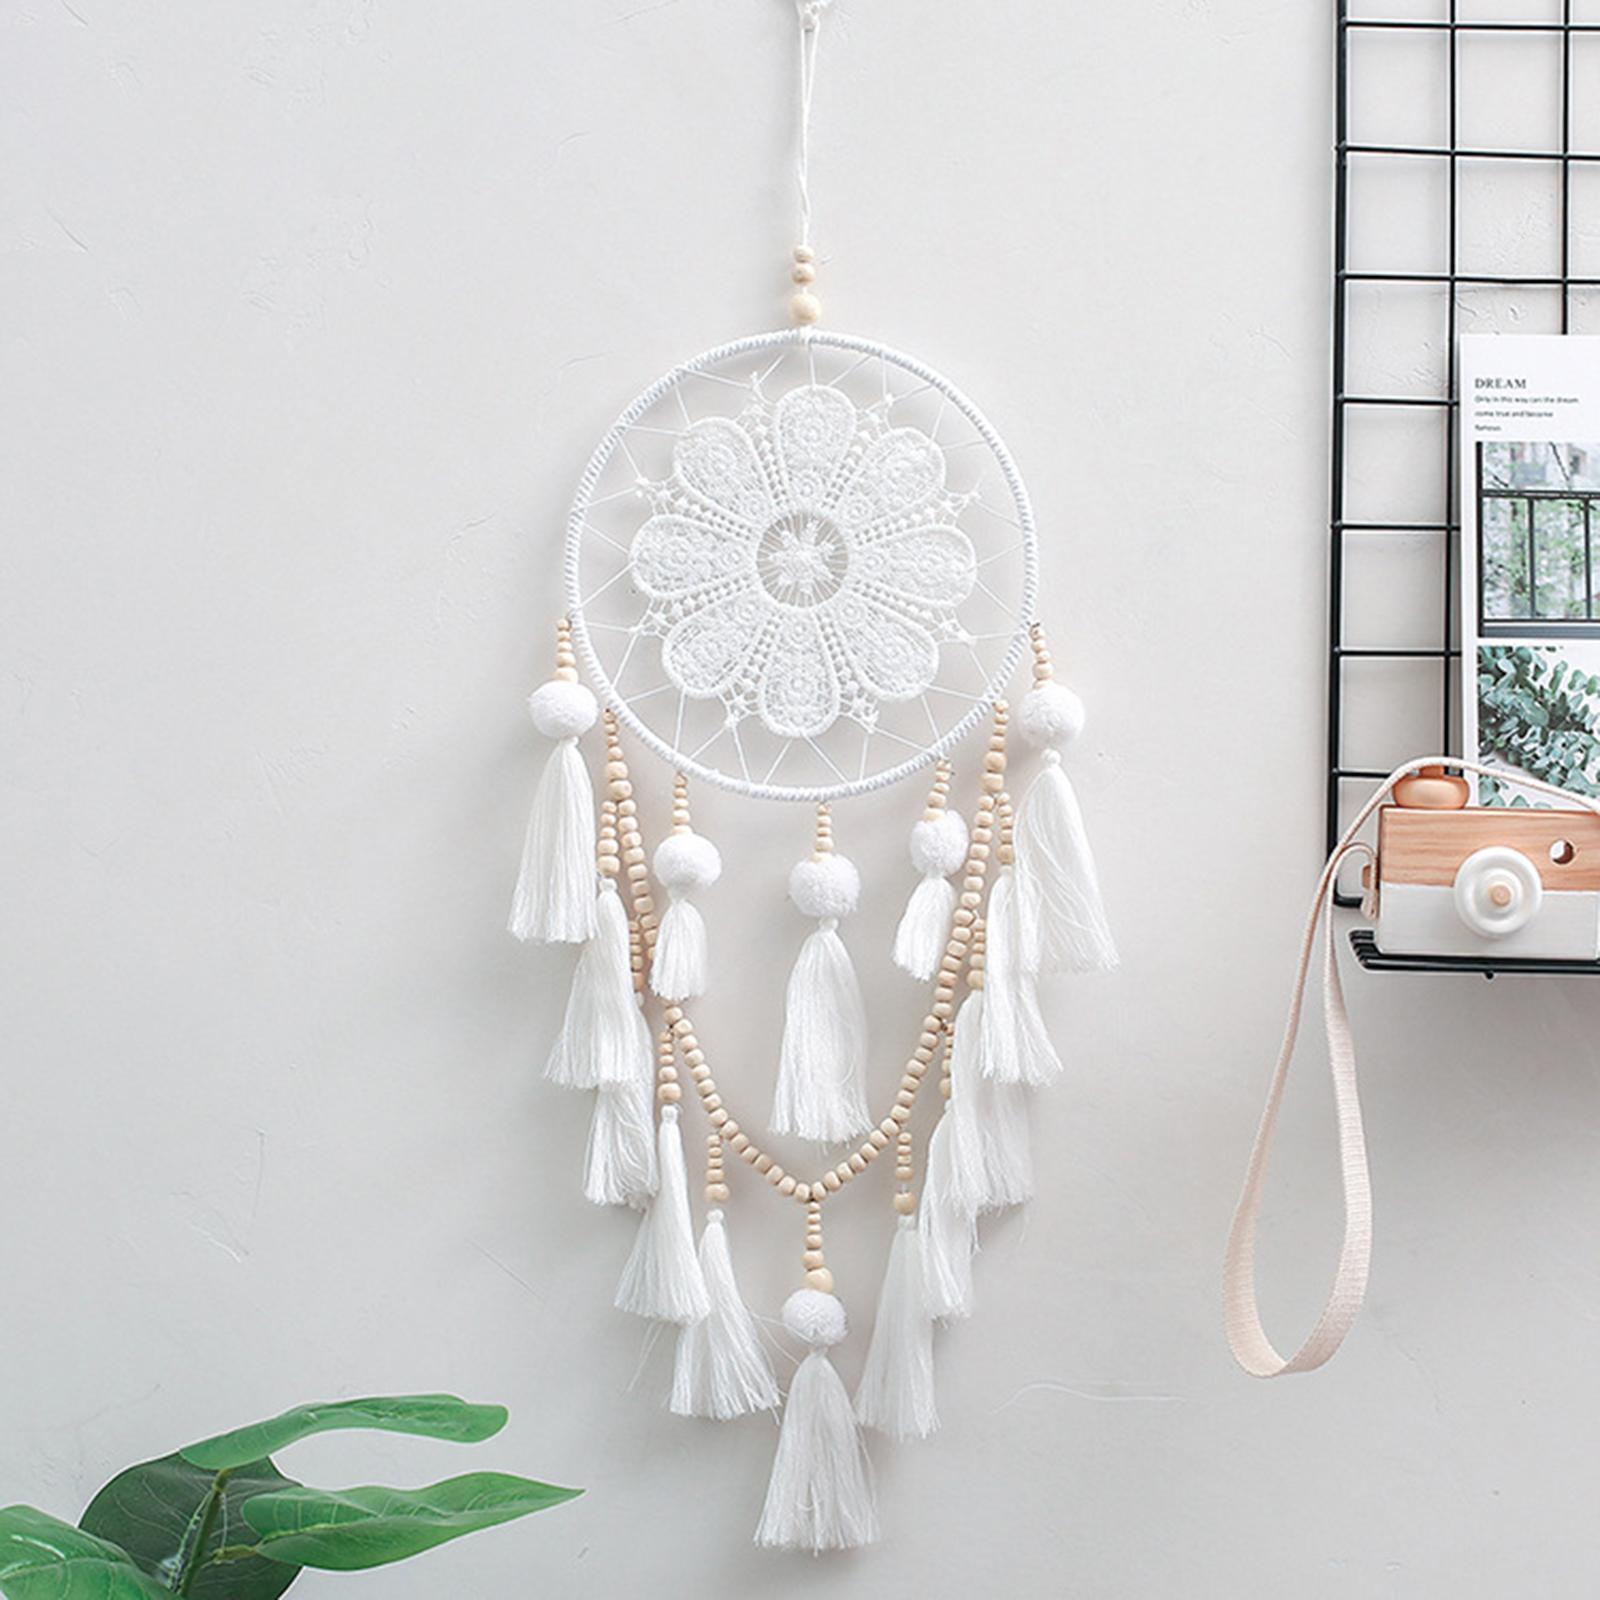 Dream Catcher Wall Hanging Wall Decor Craft for Living Room Kids Nursery